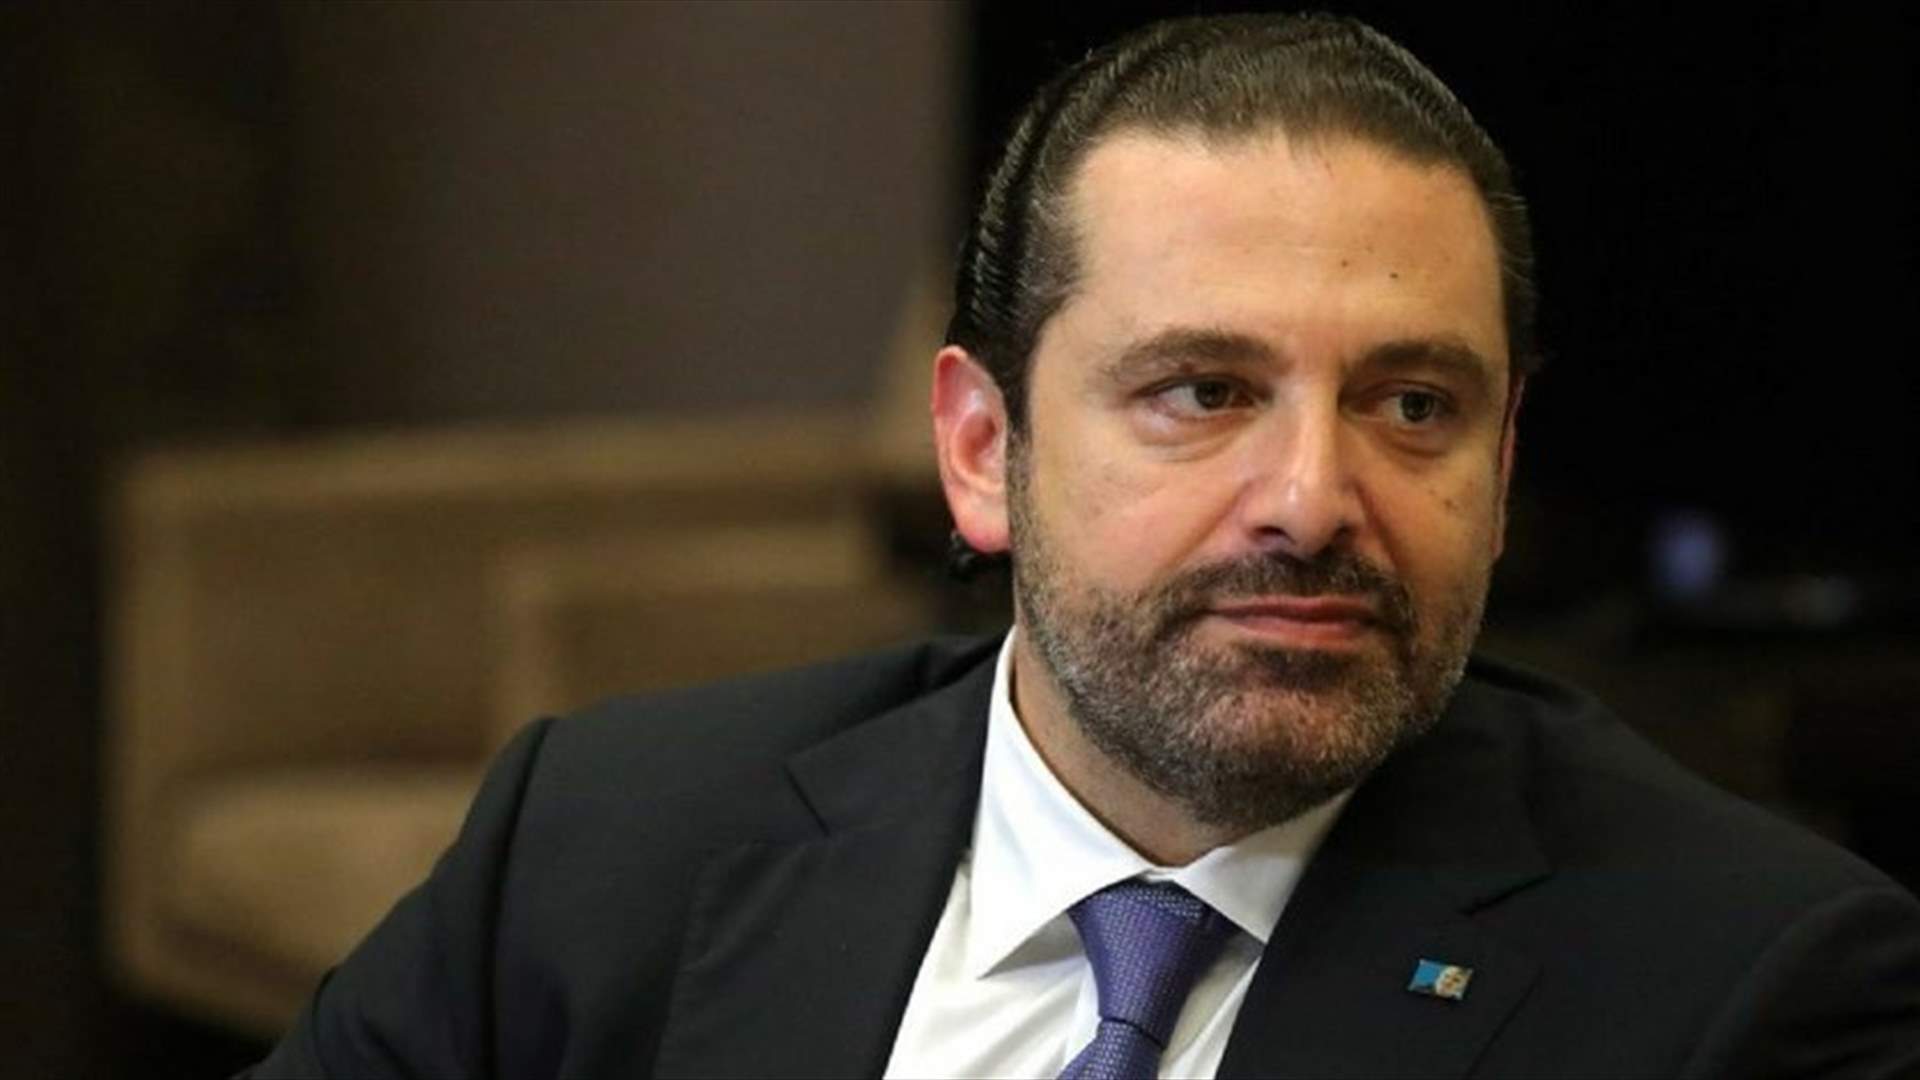 PM Hariri says electricity crisis should not continue